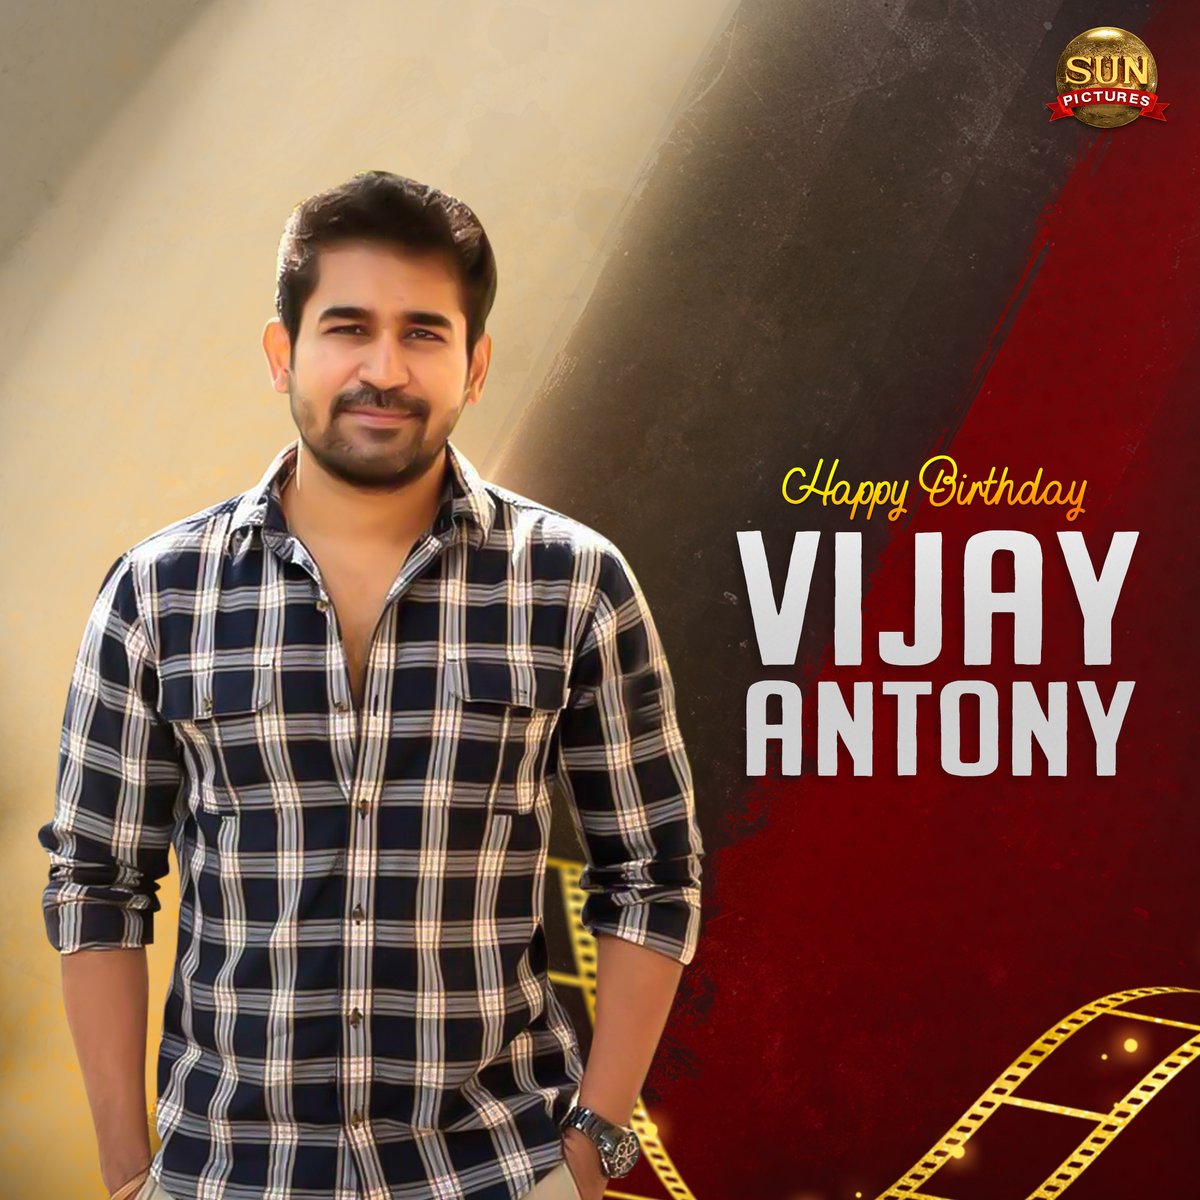 Happy birthday to the Fabulous Composer and Actor @Vijayantony #HBDVijayantony #HappyBirthdayVijayantony